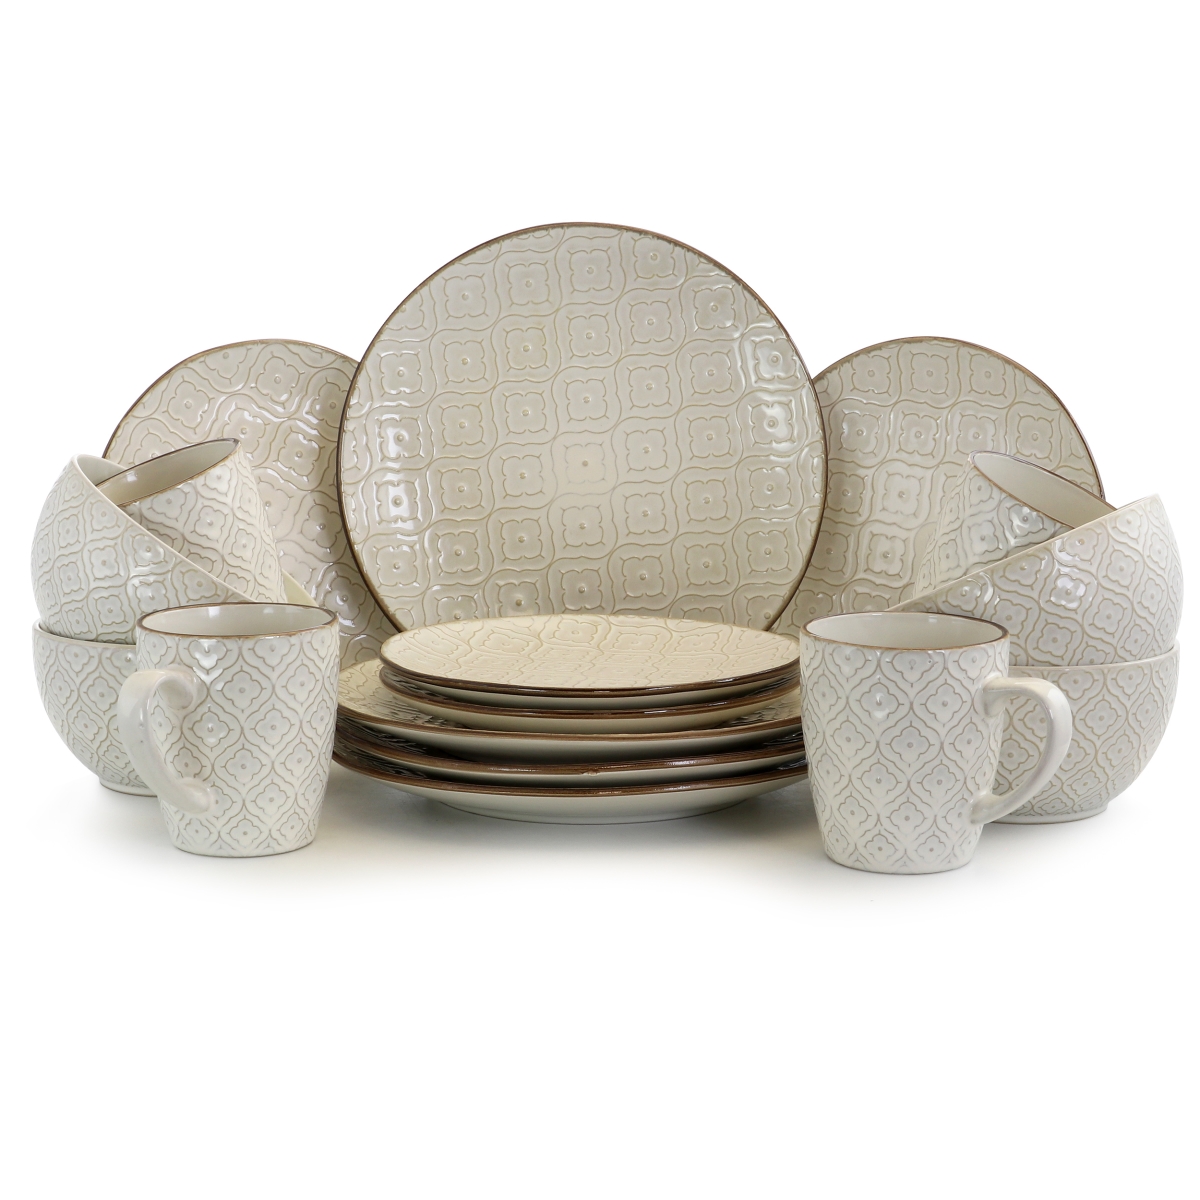 El-whitelily Lily Luxurious Stoneware Dinnerware With Complete Setting For 4, White - 16 Piece